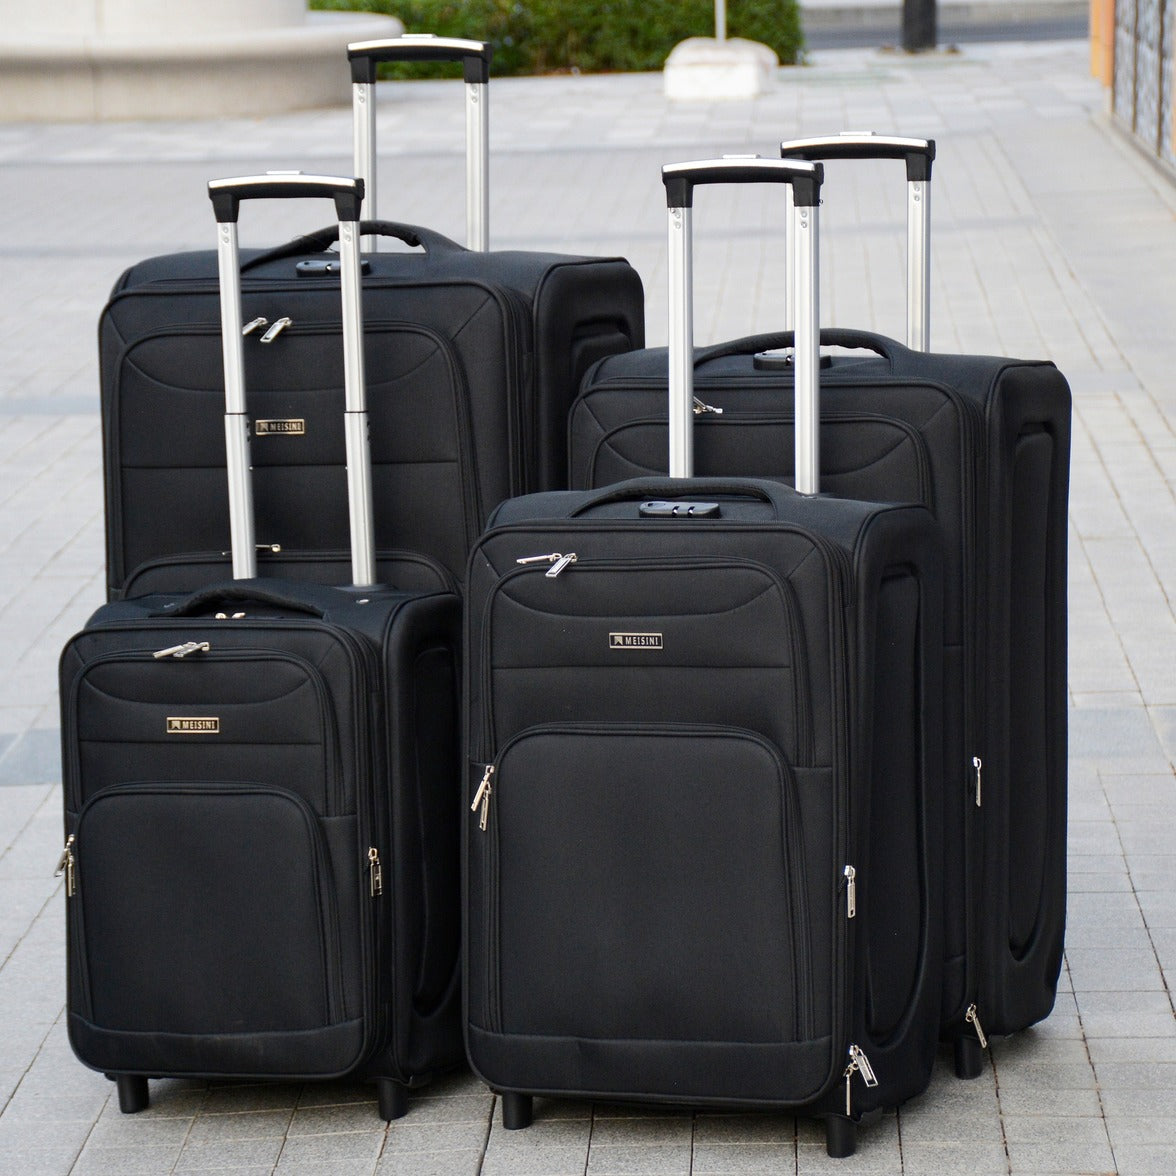 4 Piece Full Set 20" 24" 28" 32 Inches Black Colour LP 2 Wheel 0161 Luggage Lightweight Soft Material Trolley Bag